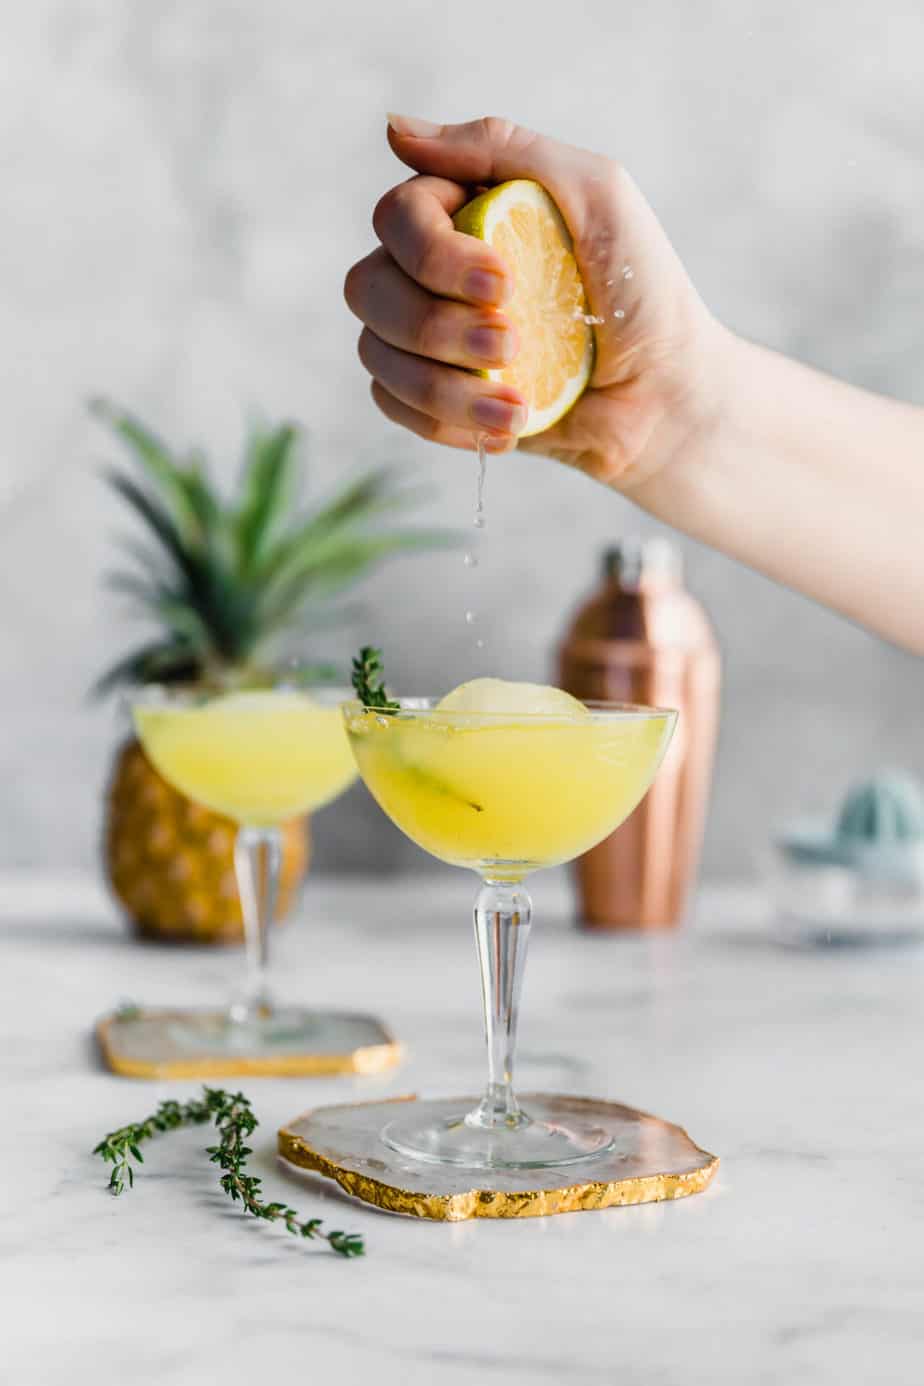 A Pineapple & Ginger Cocktail with a hand squeezing in lemon juice.